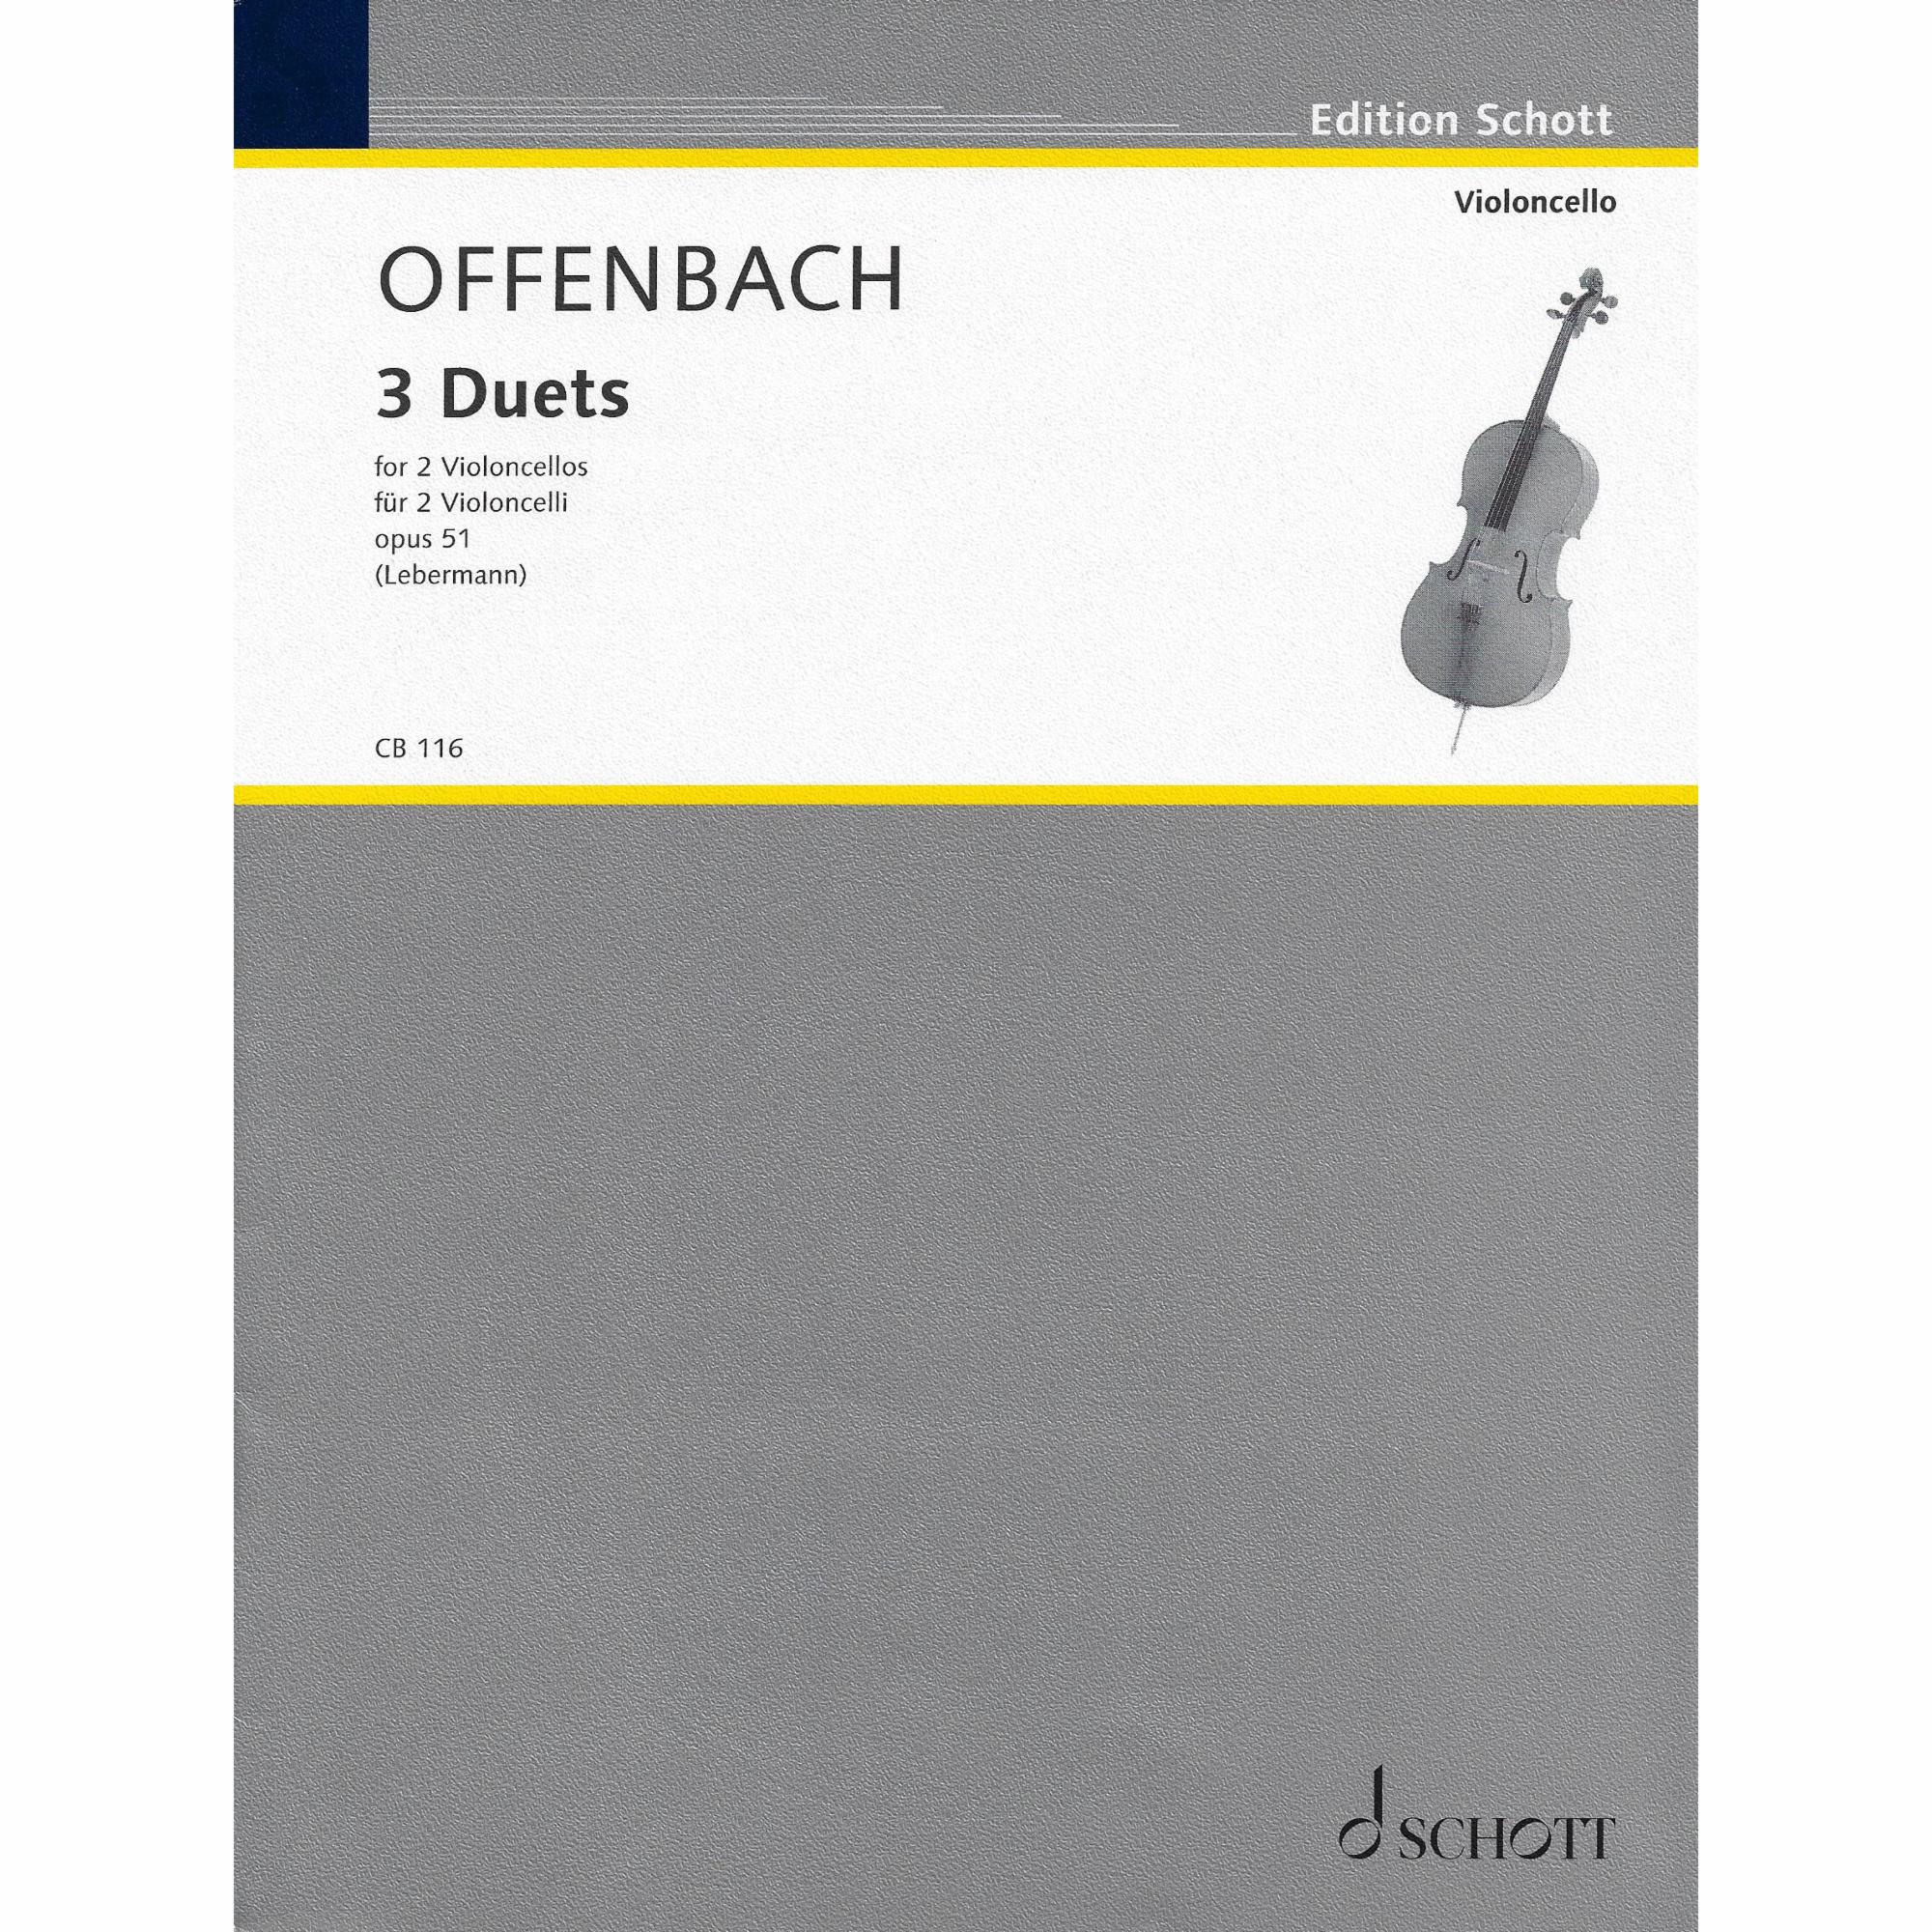 Offenbach -- 3 Duets, Op. 51 for Two Cellos